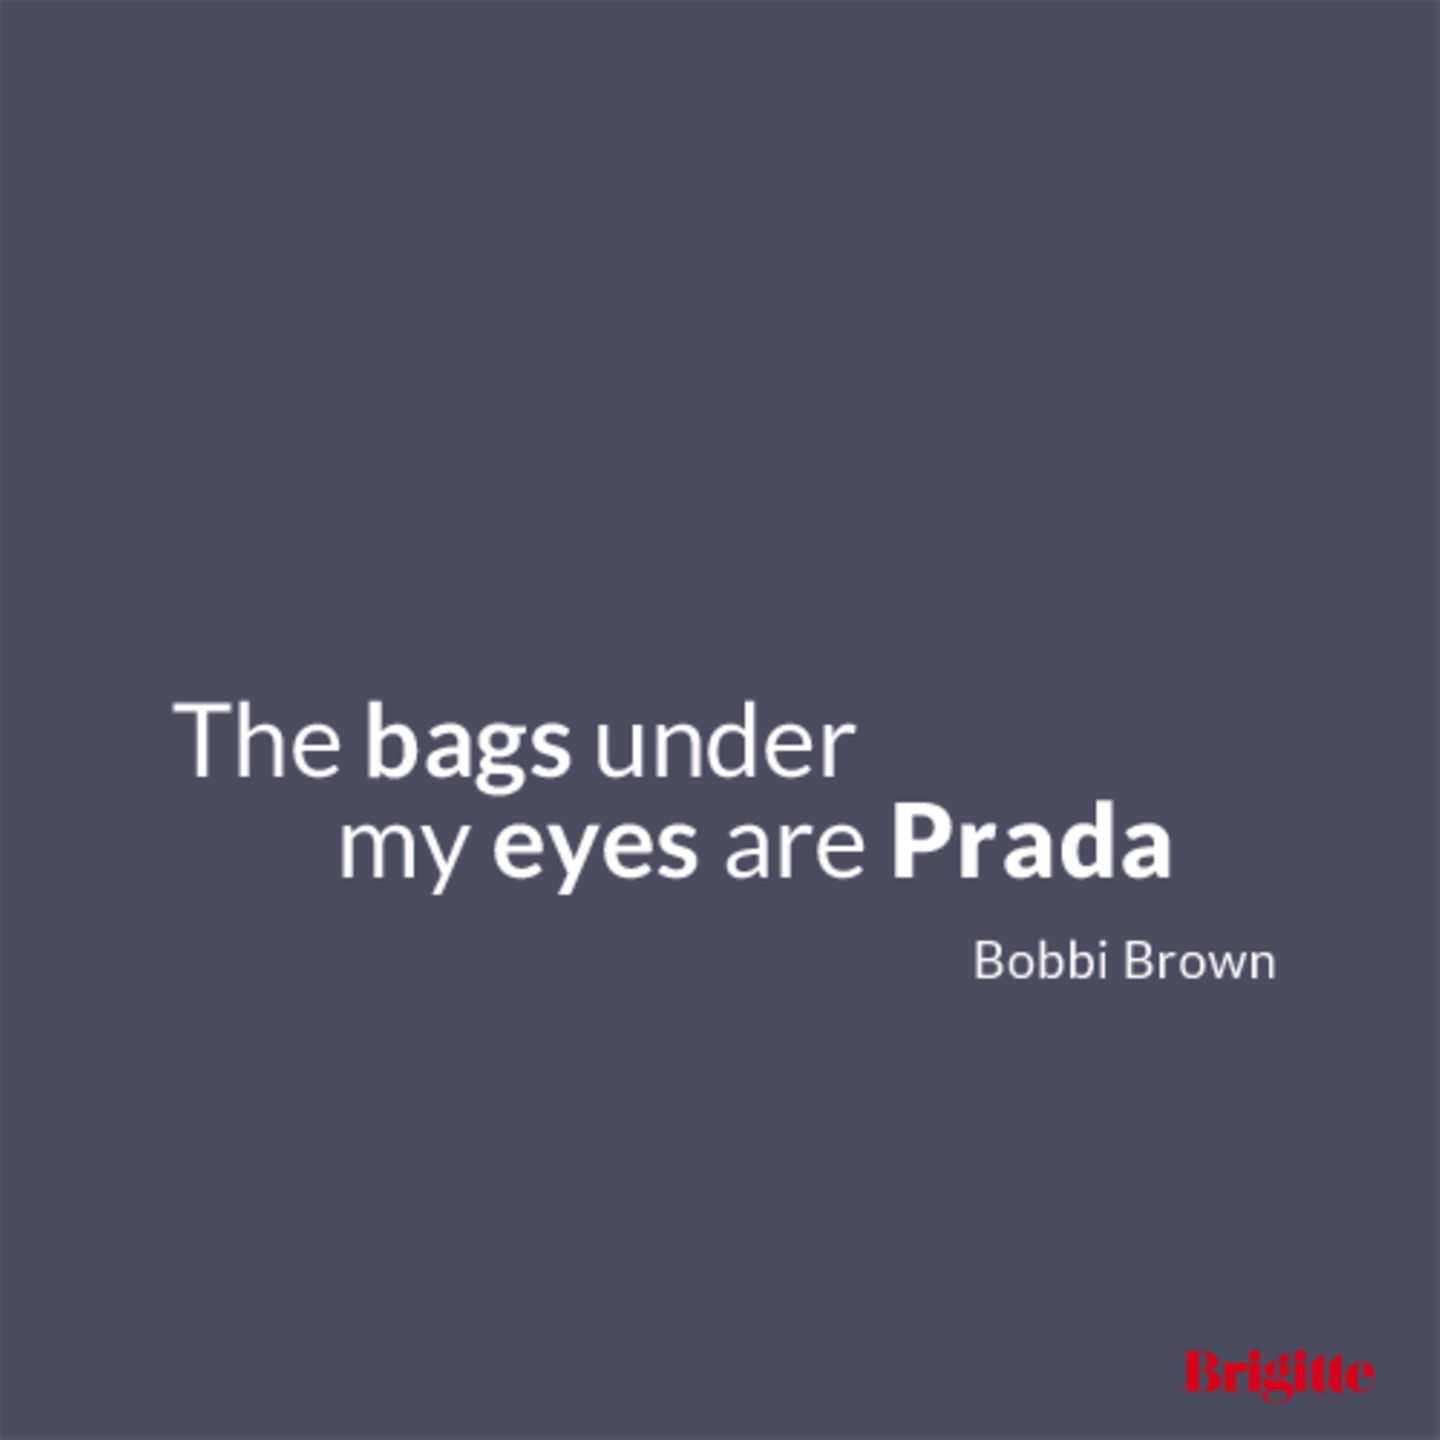 The bags under my eyes are Prada.